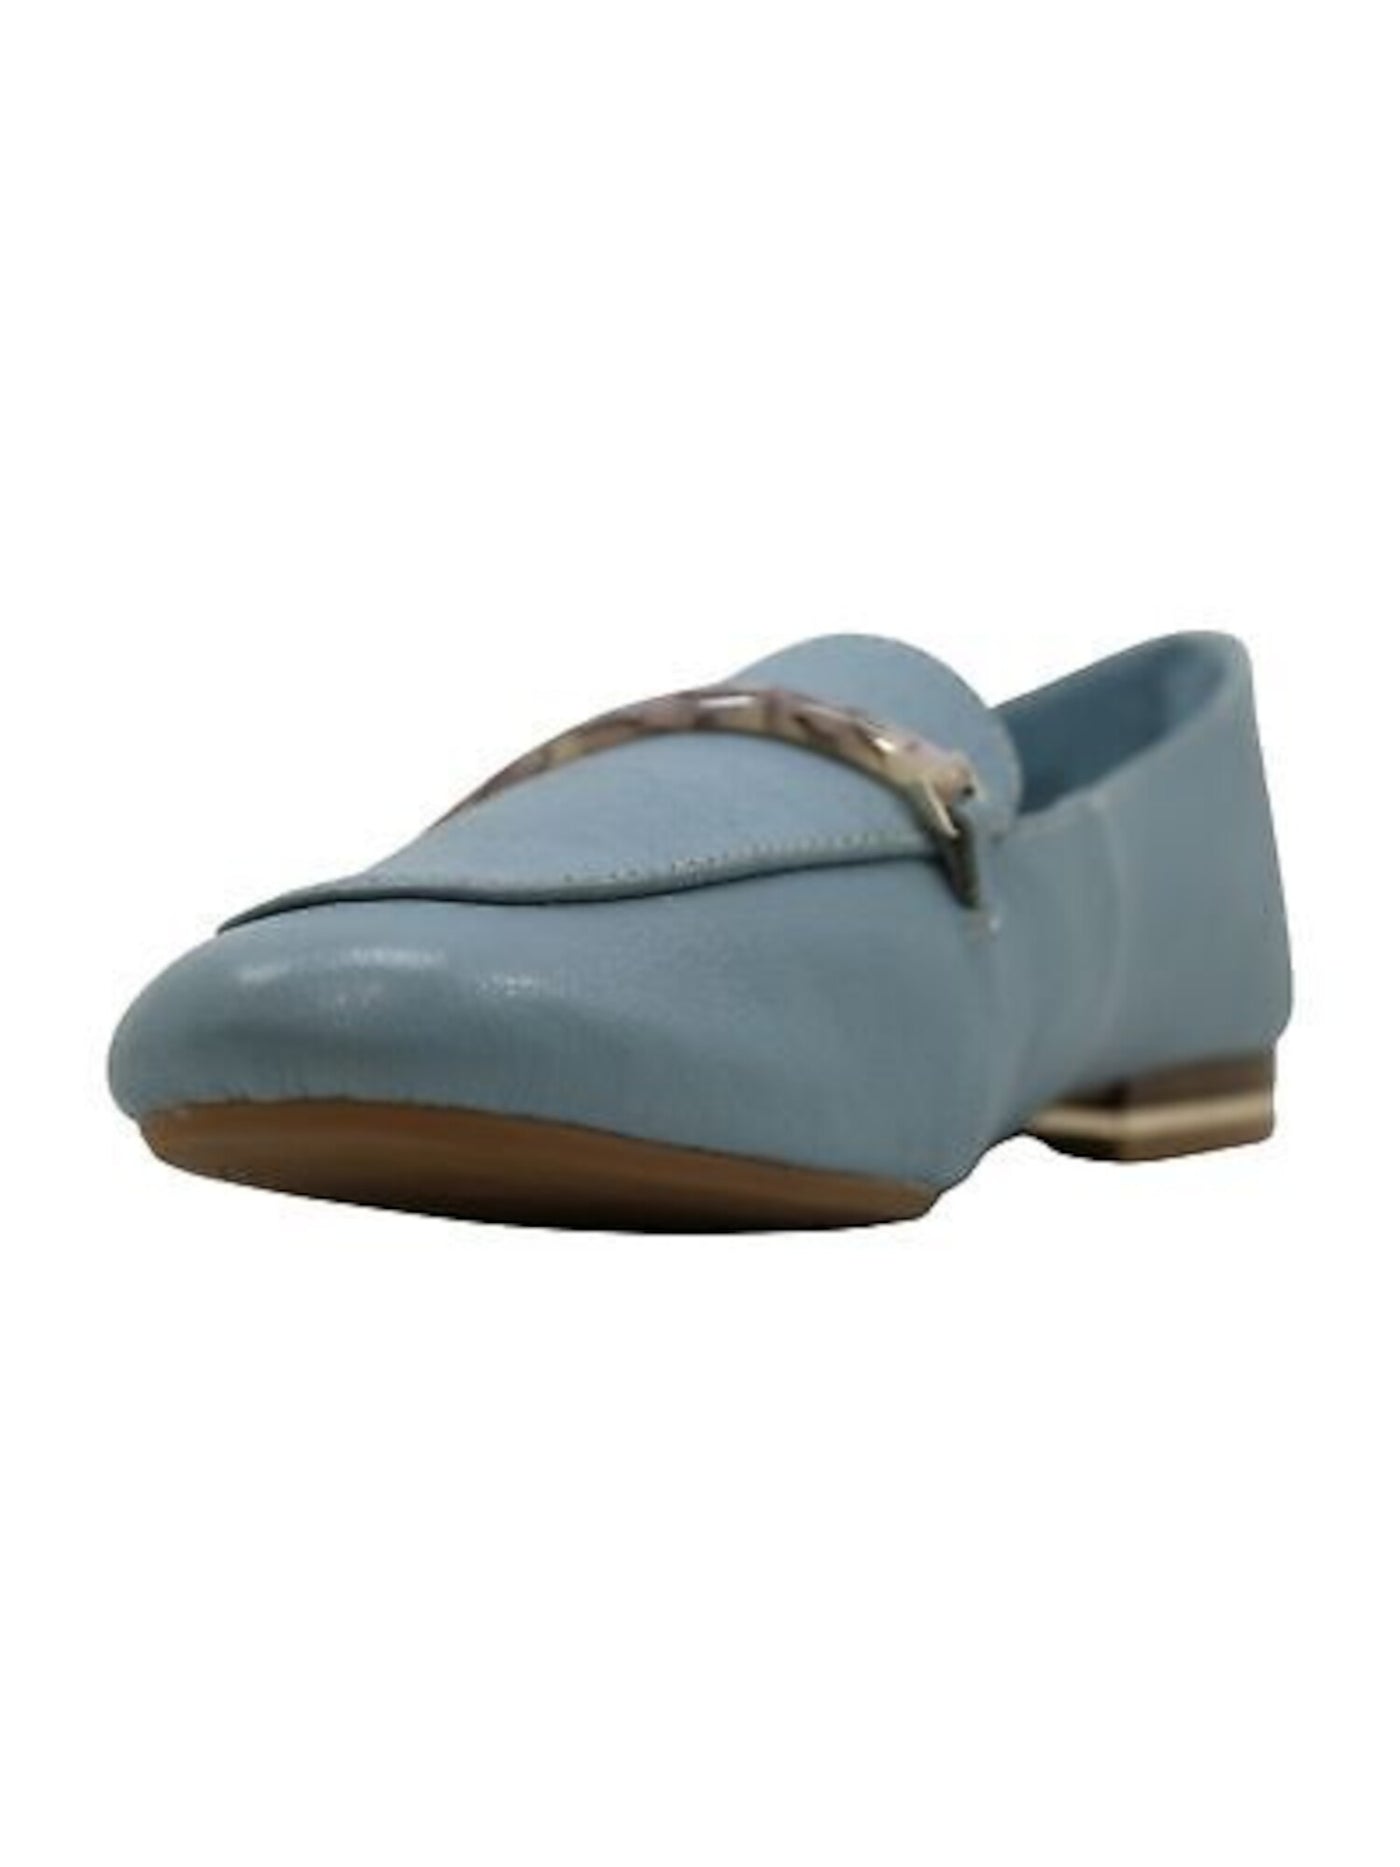 KENNETH COLE NEW YORK Womens Light Blue Hardware Detail At Toe Cap Comfort Balance Round Toe Block Heel Slip On Leather Loafers Shoes 8 M